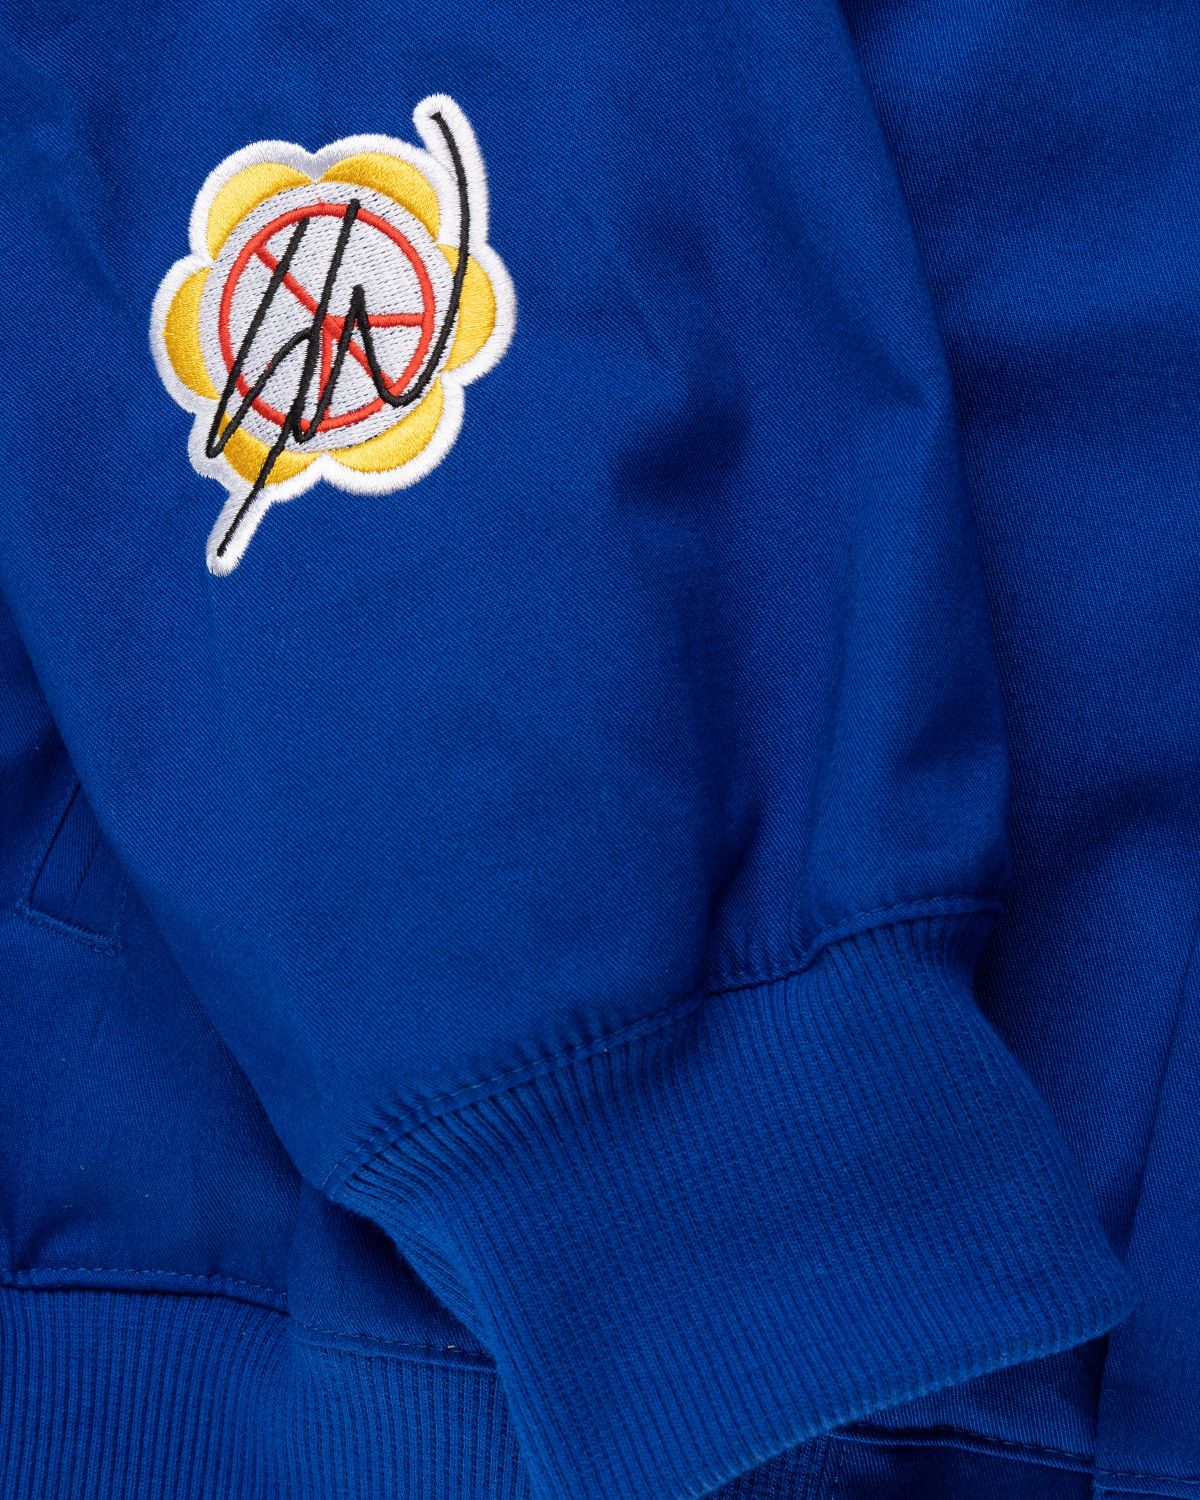 Adidas – Sean Wotherspoon x Hot Wheels Race Jacket Blue - Outerwear - Blue - Image 4